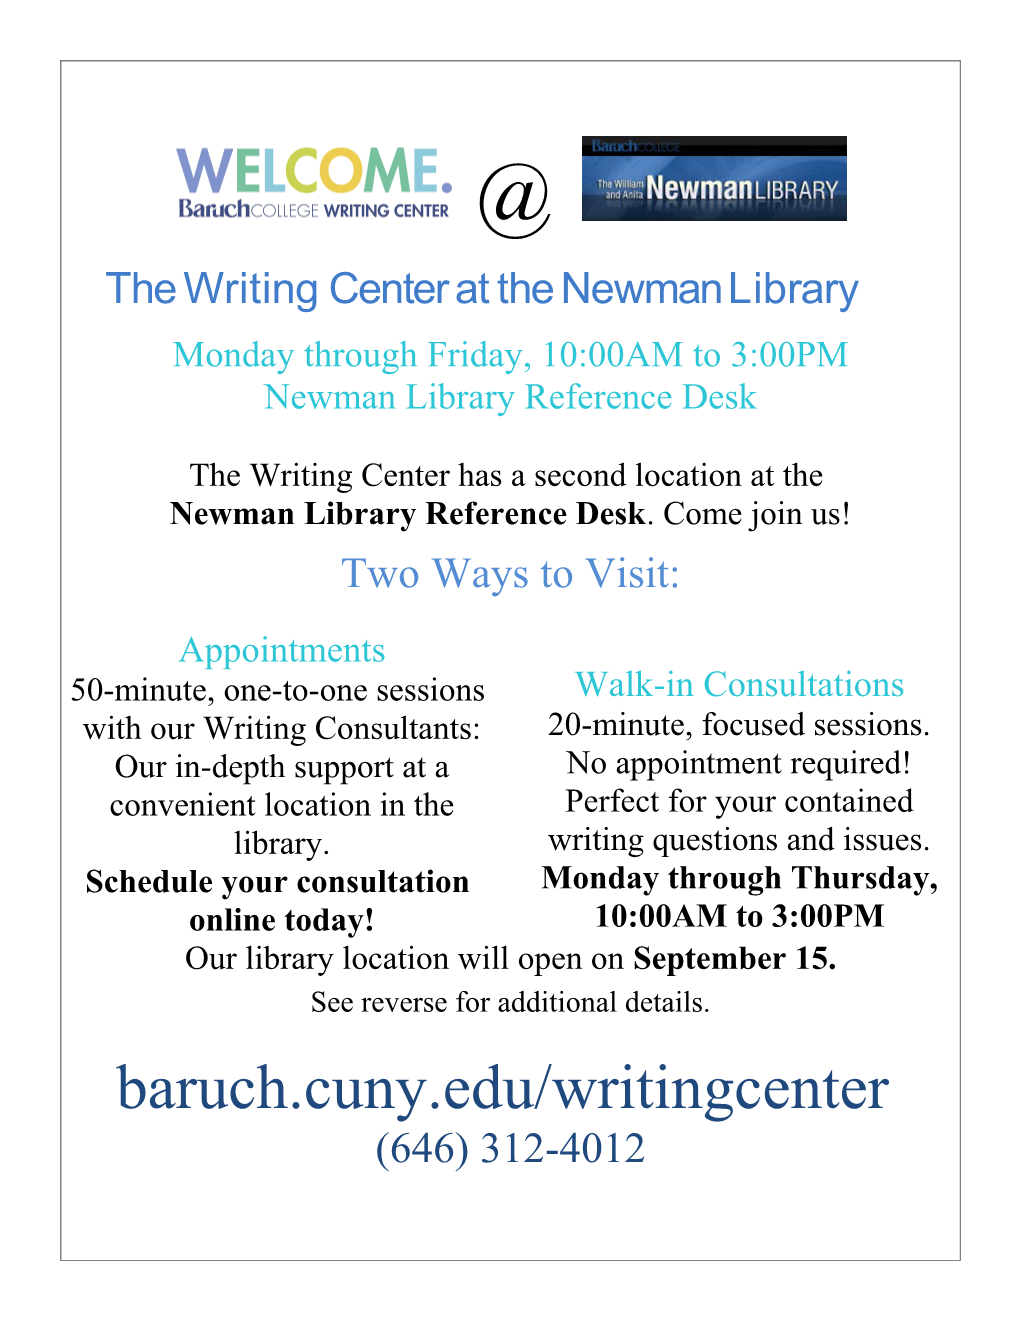 The Writing Center at the Newman Library